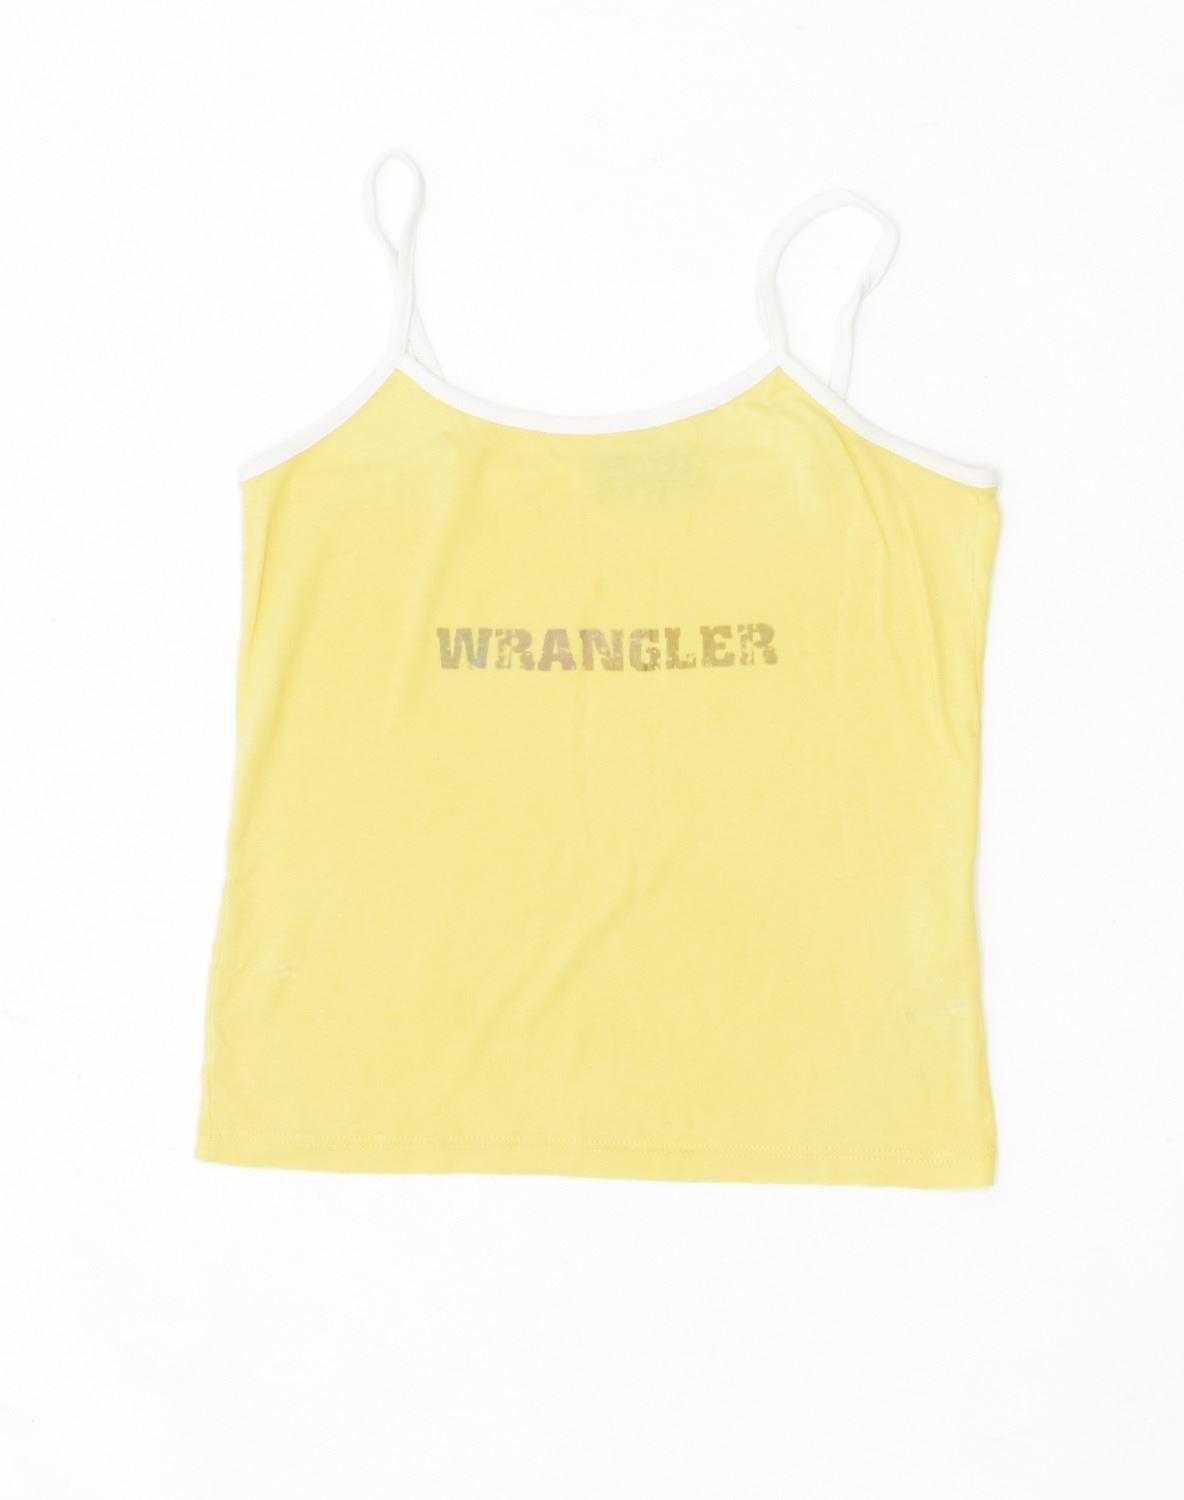 WRANGLER Womens Graphic Cami Top UK 18 XL Yellow, Vintage & Second-Hand  Clothing Online